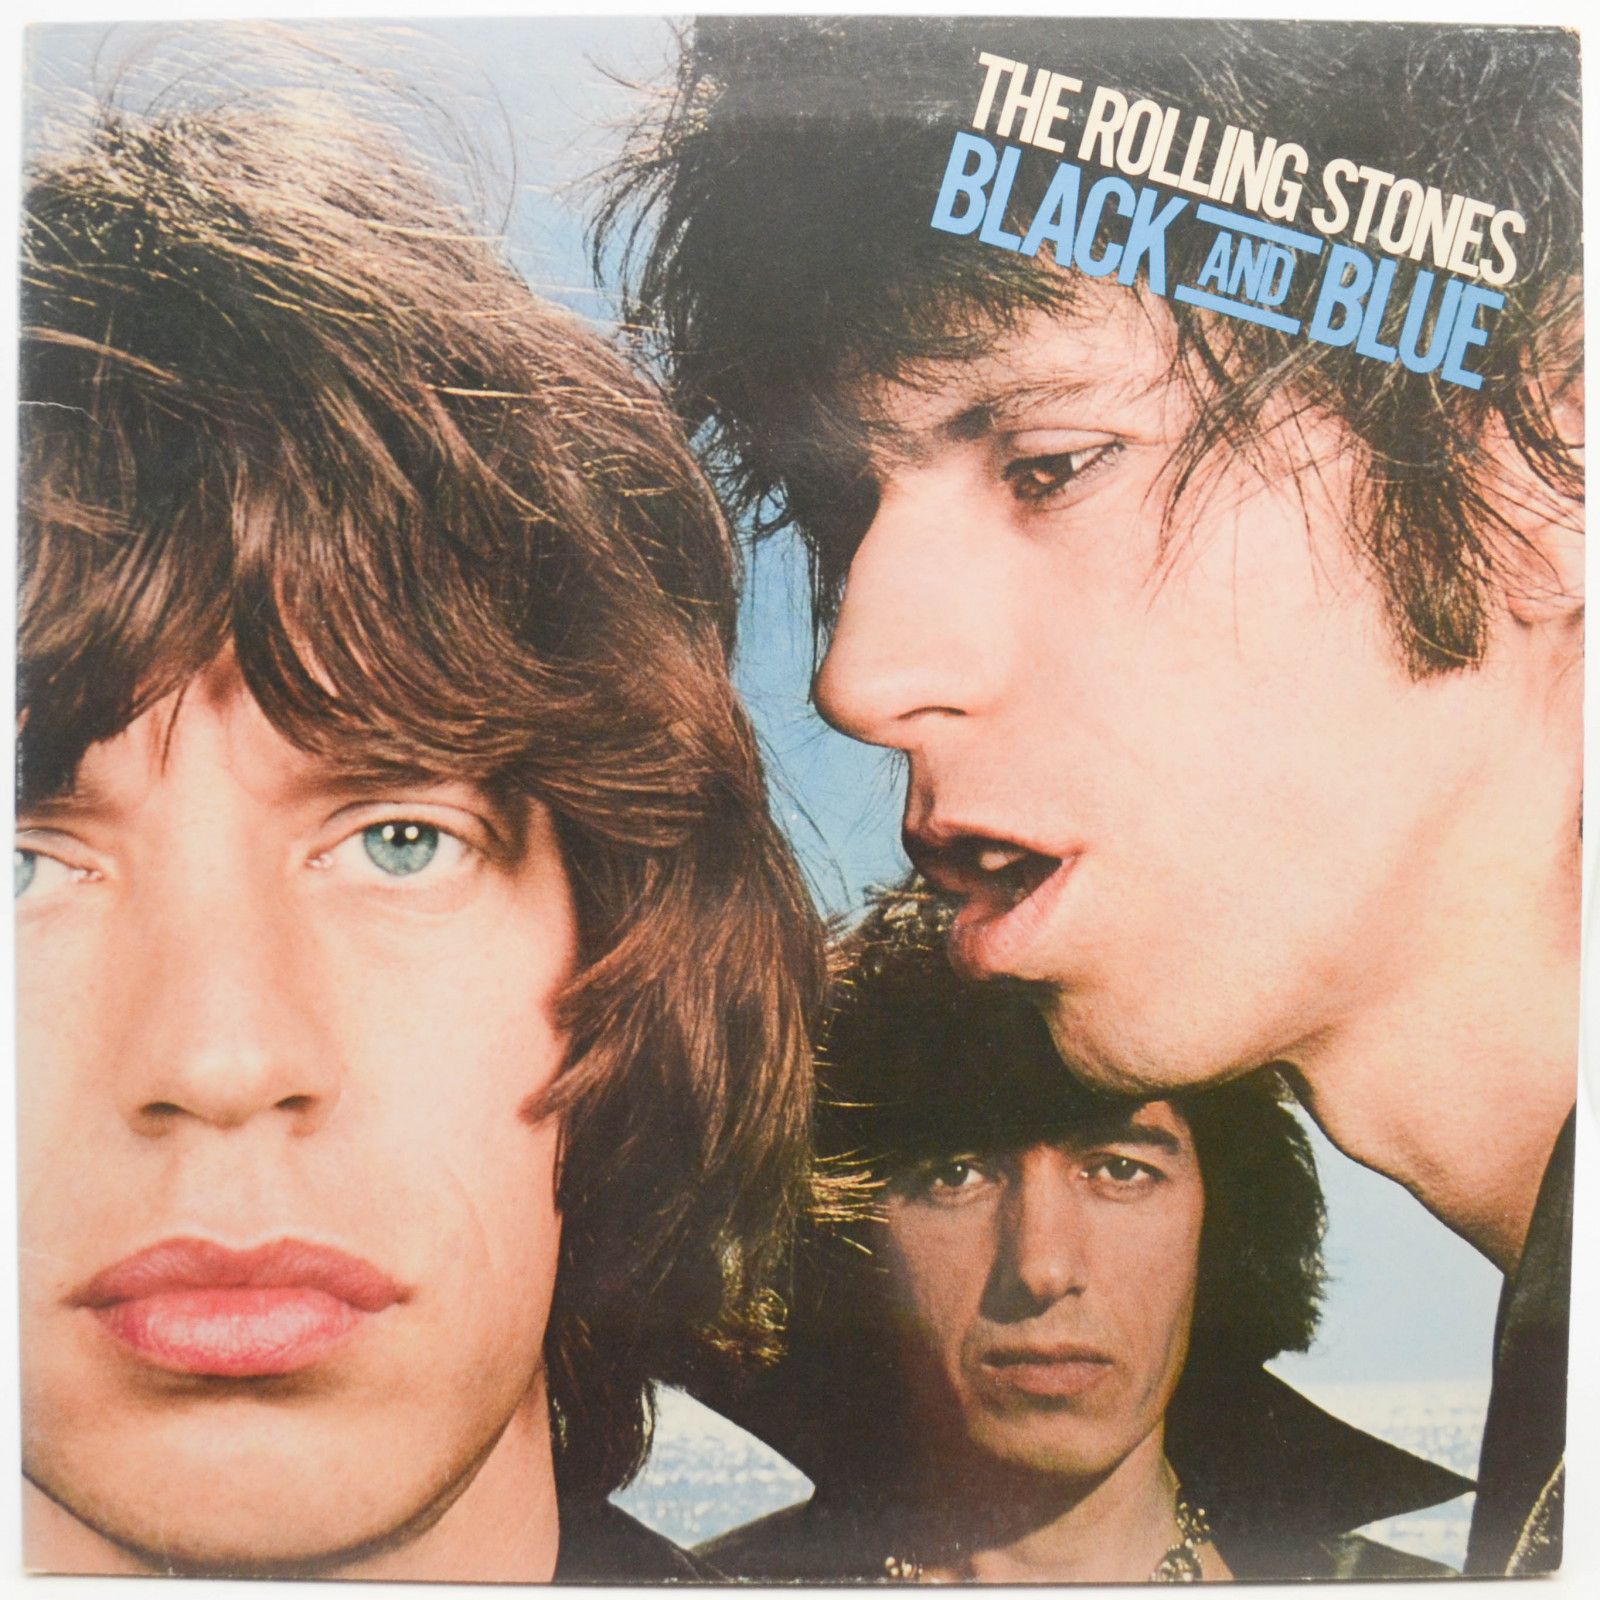 Rolling Stones — Black And Blue (USA), 1976